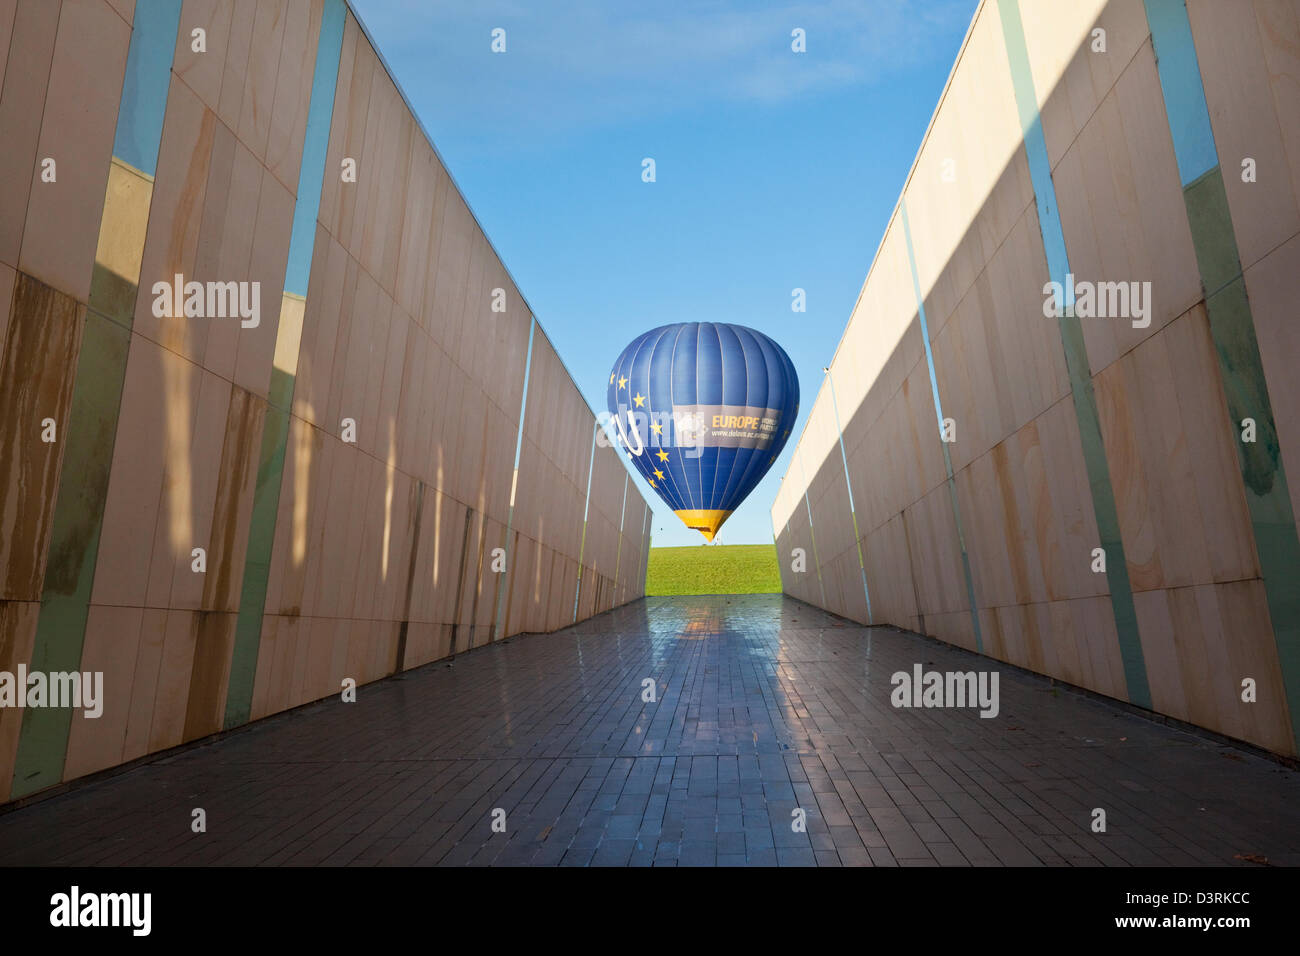 View of hot air balloon from the marble walkway at Commonwealth Place. Canberra, Australian Capital Territory (ACT), Australia Stock Photo